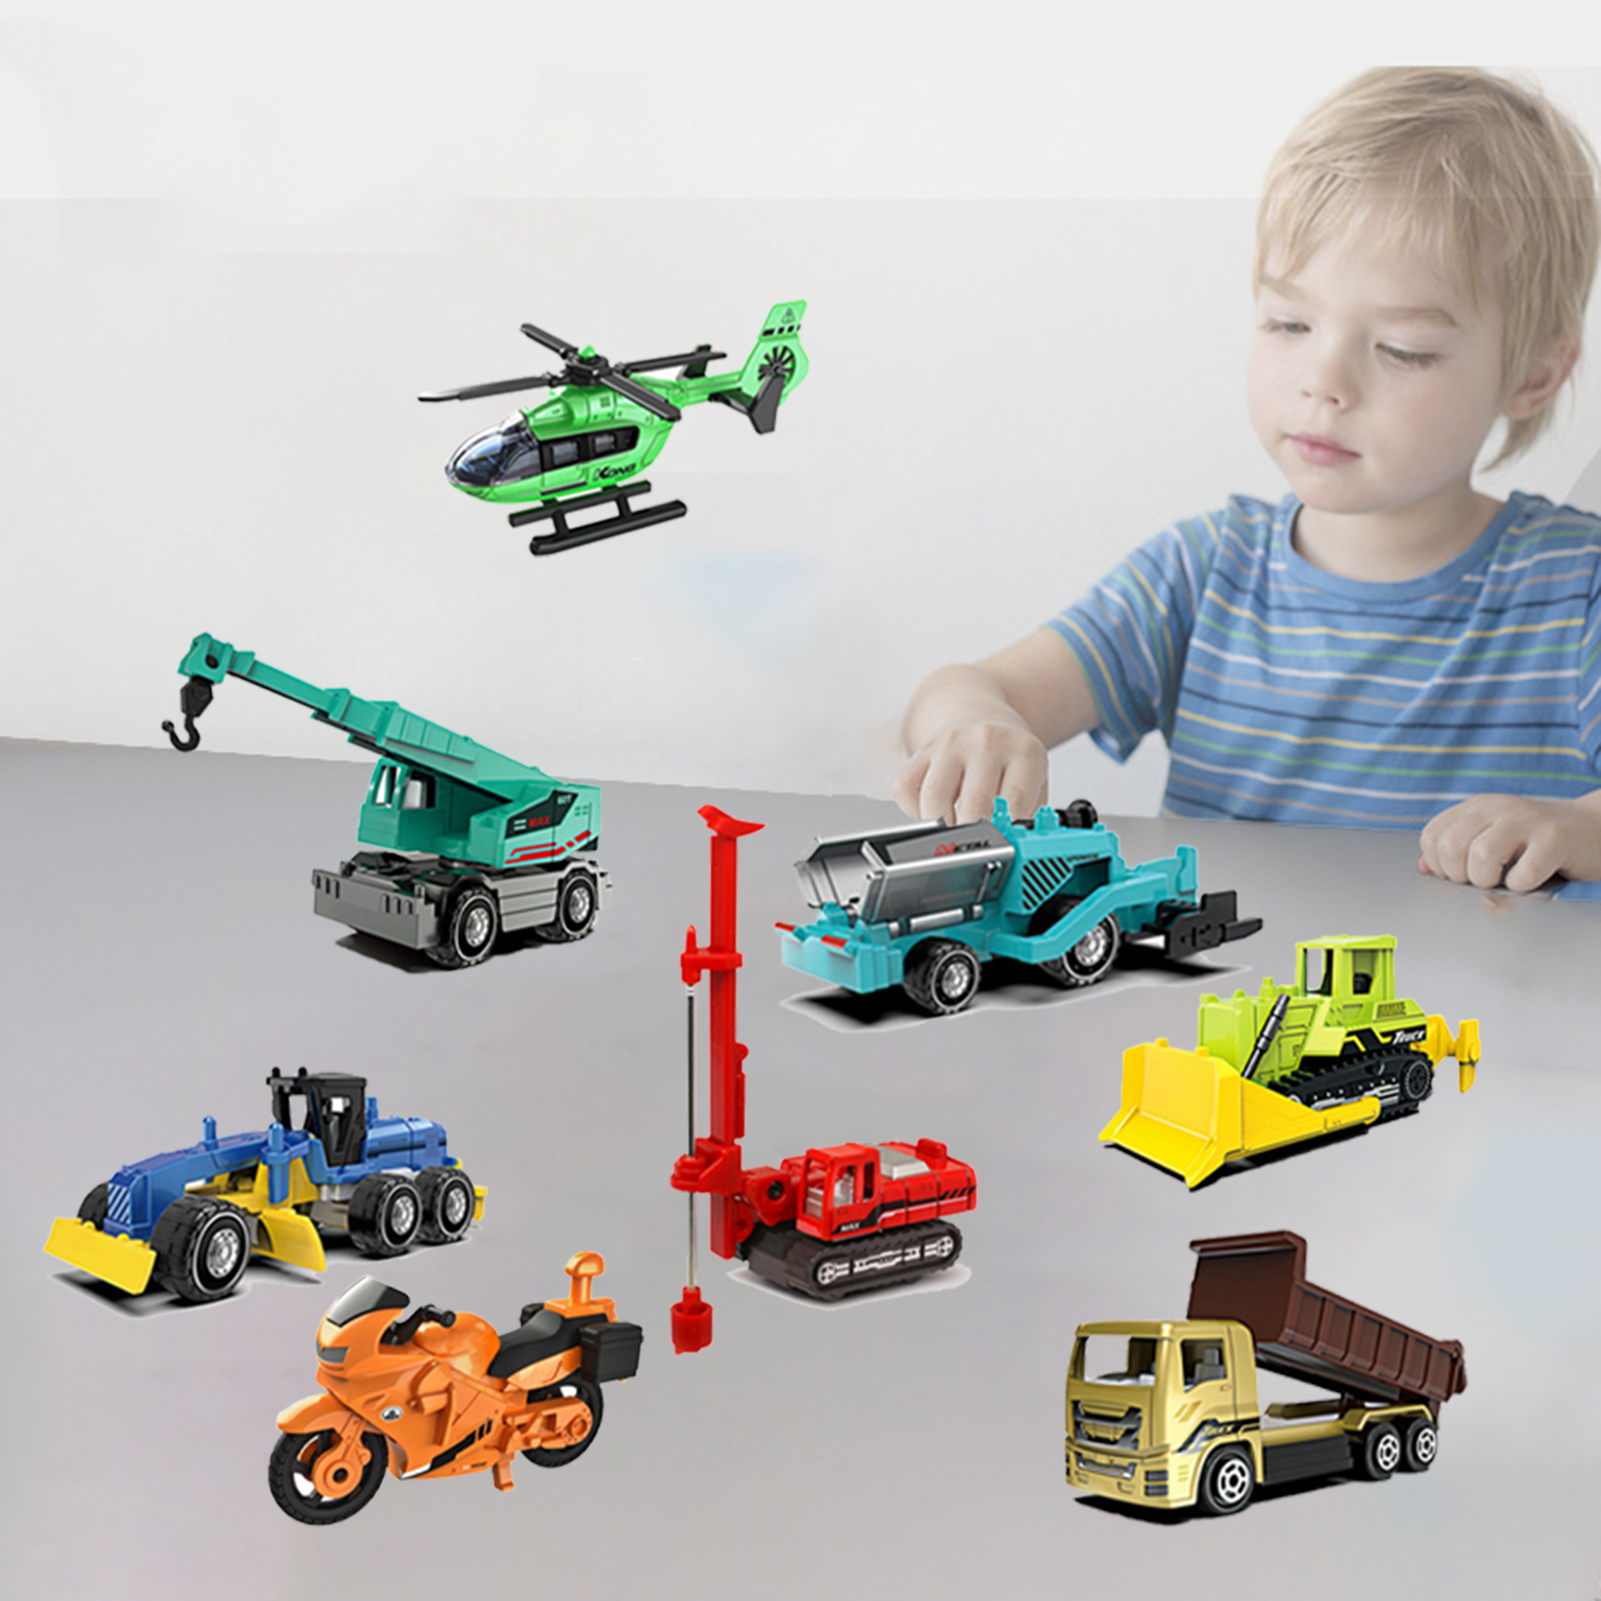 Pnellth 4Pcs/Set Engineering Trunk Toys Simulation Cranes Forklift Cargo Truck Diecast Alloy Vehicle Toy 1:64 Scale Engineering Vehicle Aircraft Motorcycle Models Set Christmas Gift - image 4 of 7